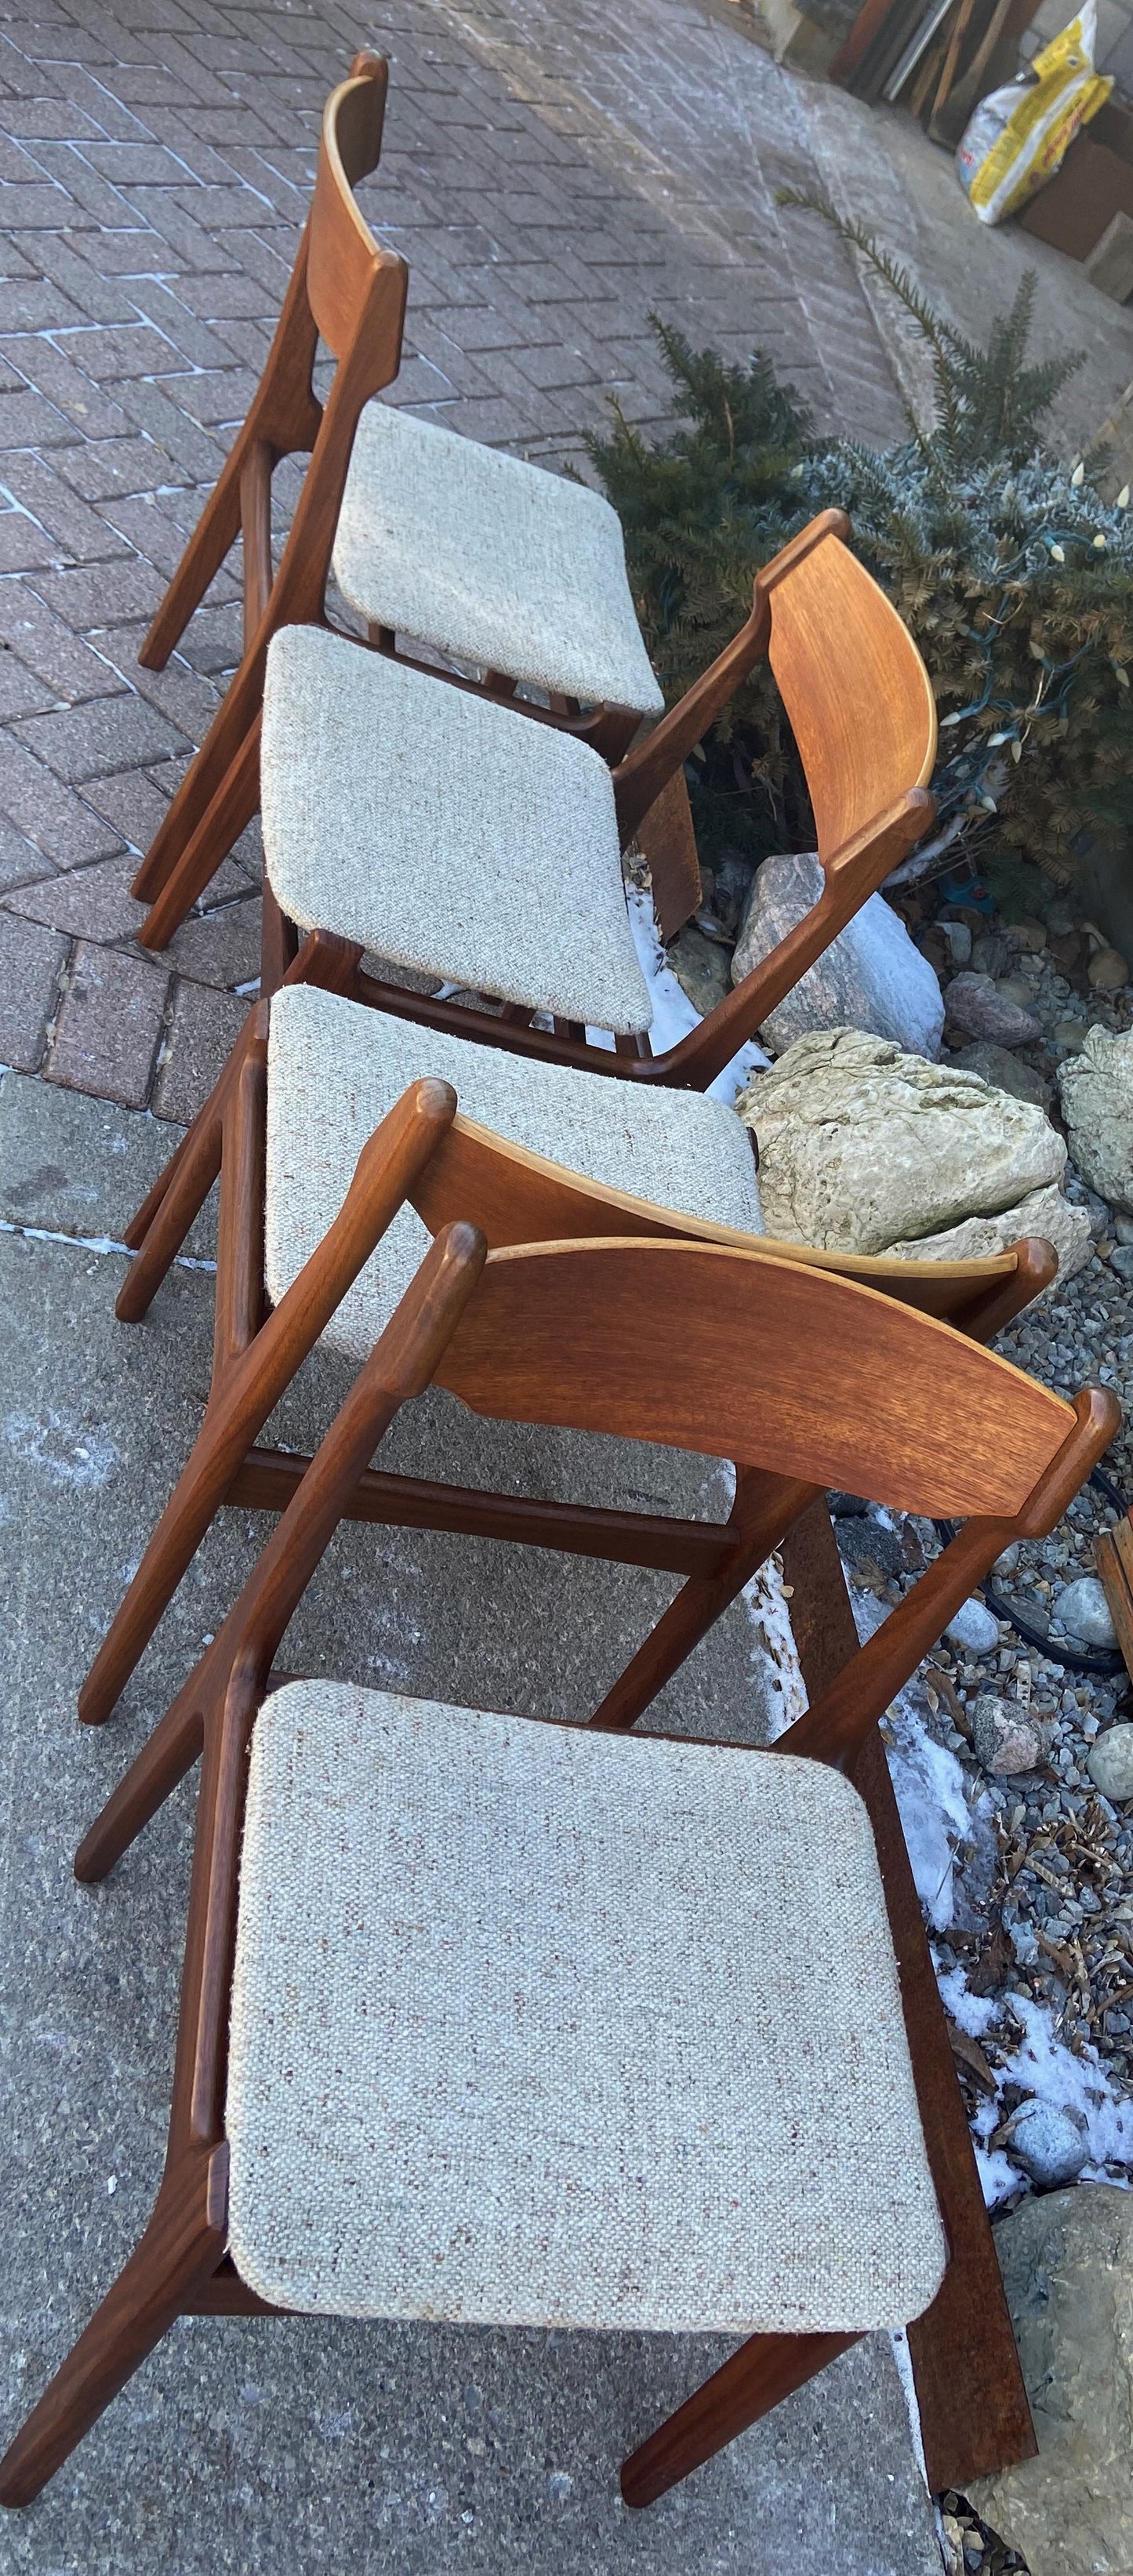 4 REFINISHED Danish MCM Teak Chairs by Erik Buch, will be REUPHOLSTERED